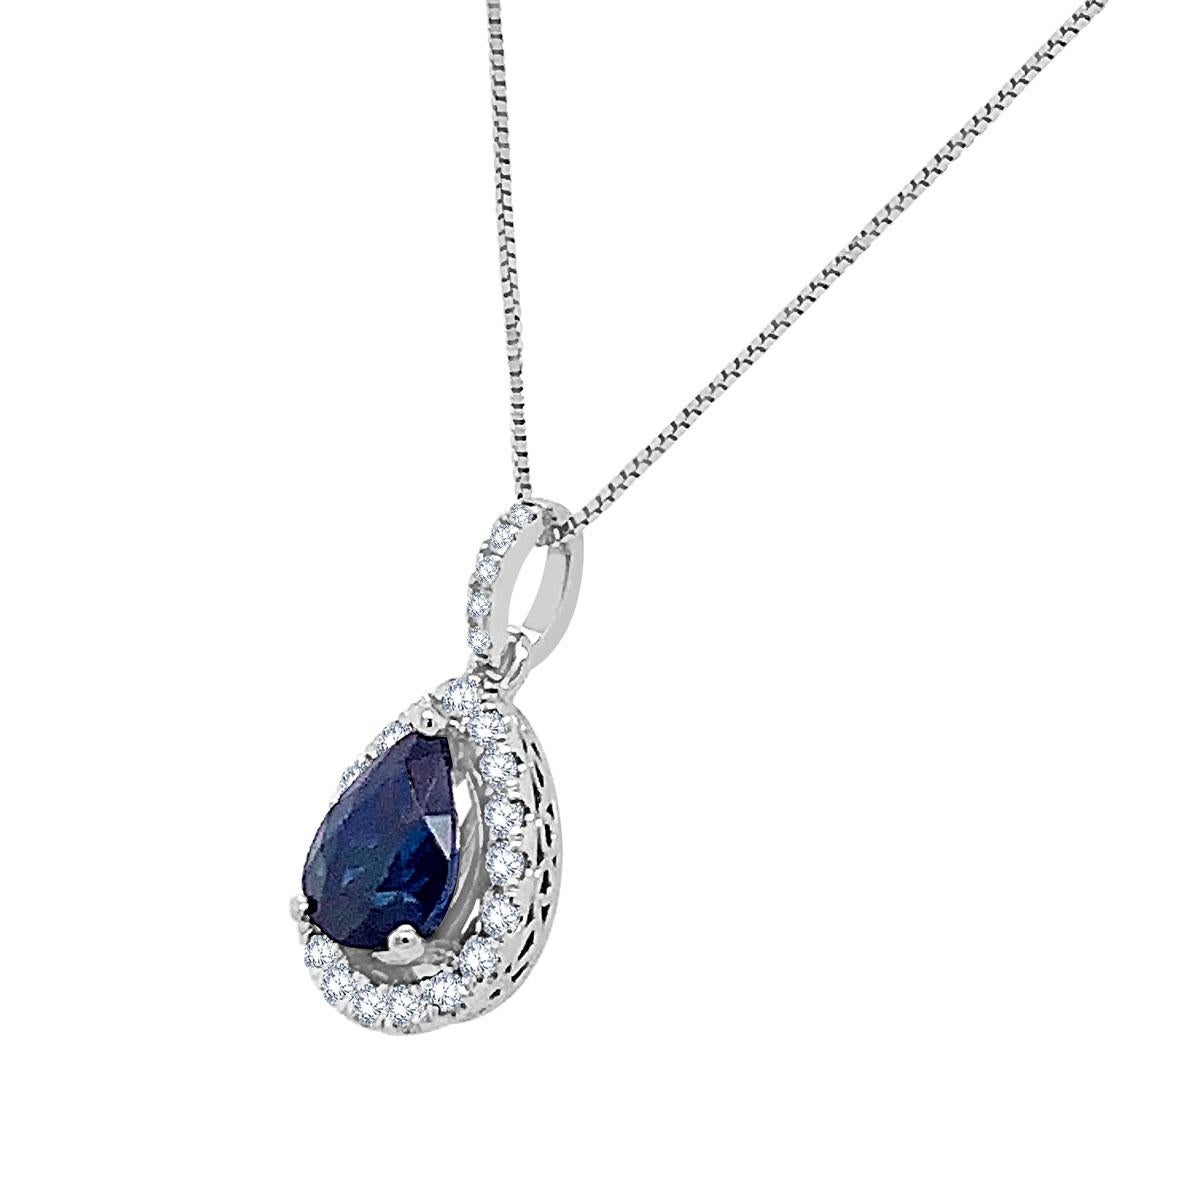 These extraordinary hand crafted 18k white gold pendant features preminum quality 1.92 Carat Pear Shape Blue Sapphire, framed in a halo of 0.30 carat total weight of brilliant diamonds. This pendant is ideal for any occasions. Experience the